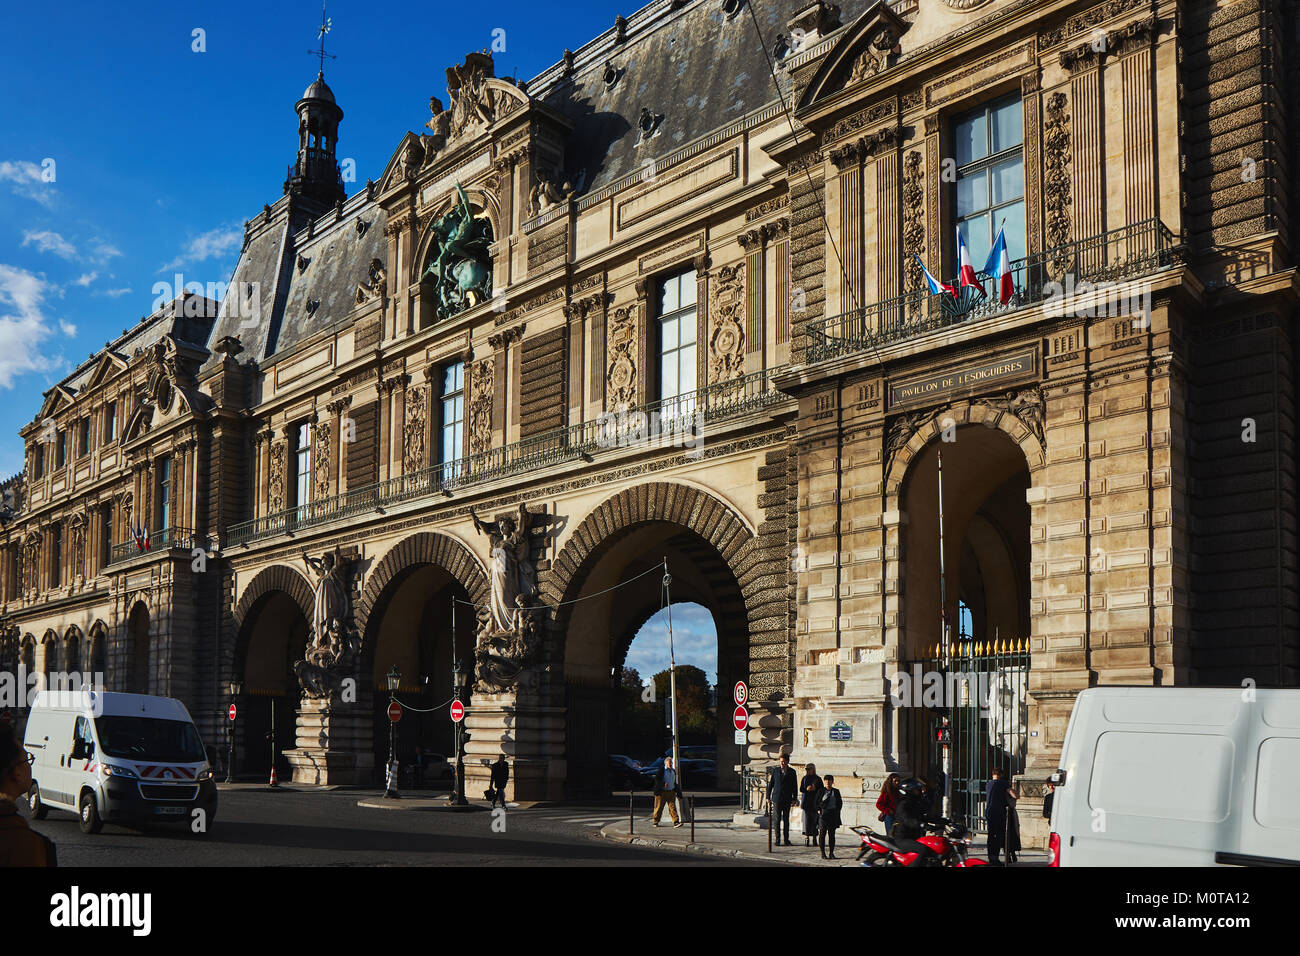 Paris,France - October 3 2017 : Traffic road on street near Louvre Pyramid at Musee du Louvre or the Grand Louvre Museum . Stock Photo